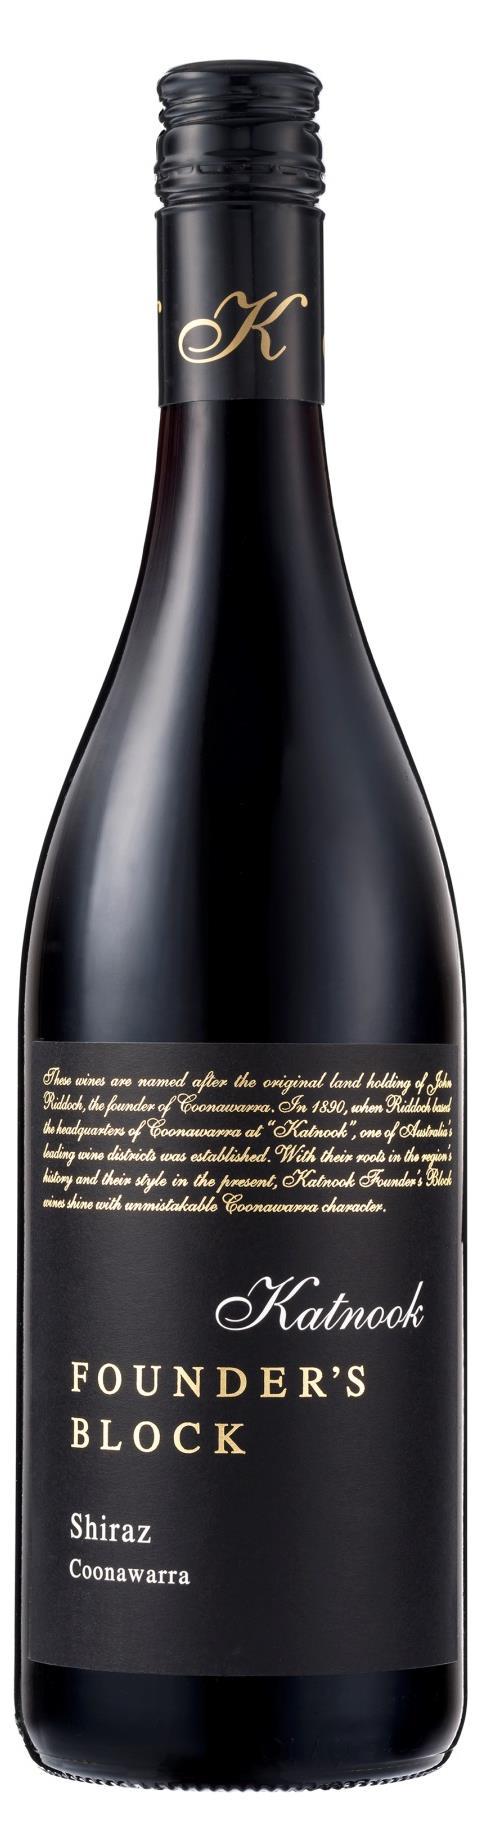 Shiraz 2013 Founder s Block wines are named in honour of the original land holding of John Riddoch, the founder of Coonawarra.